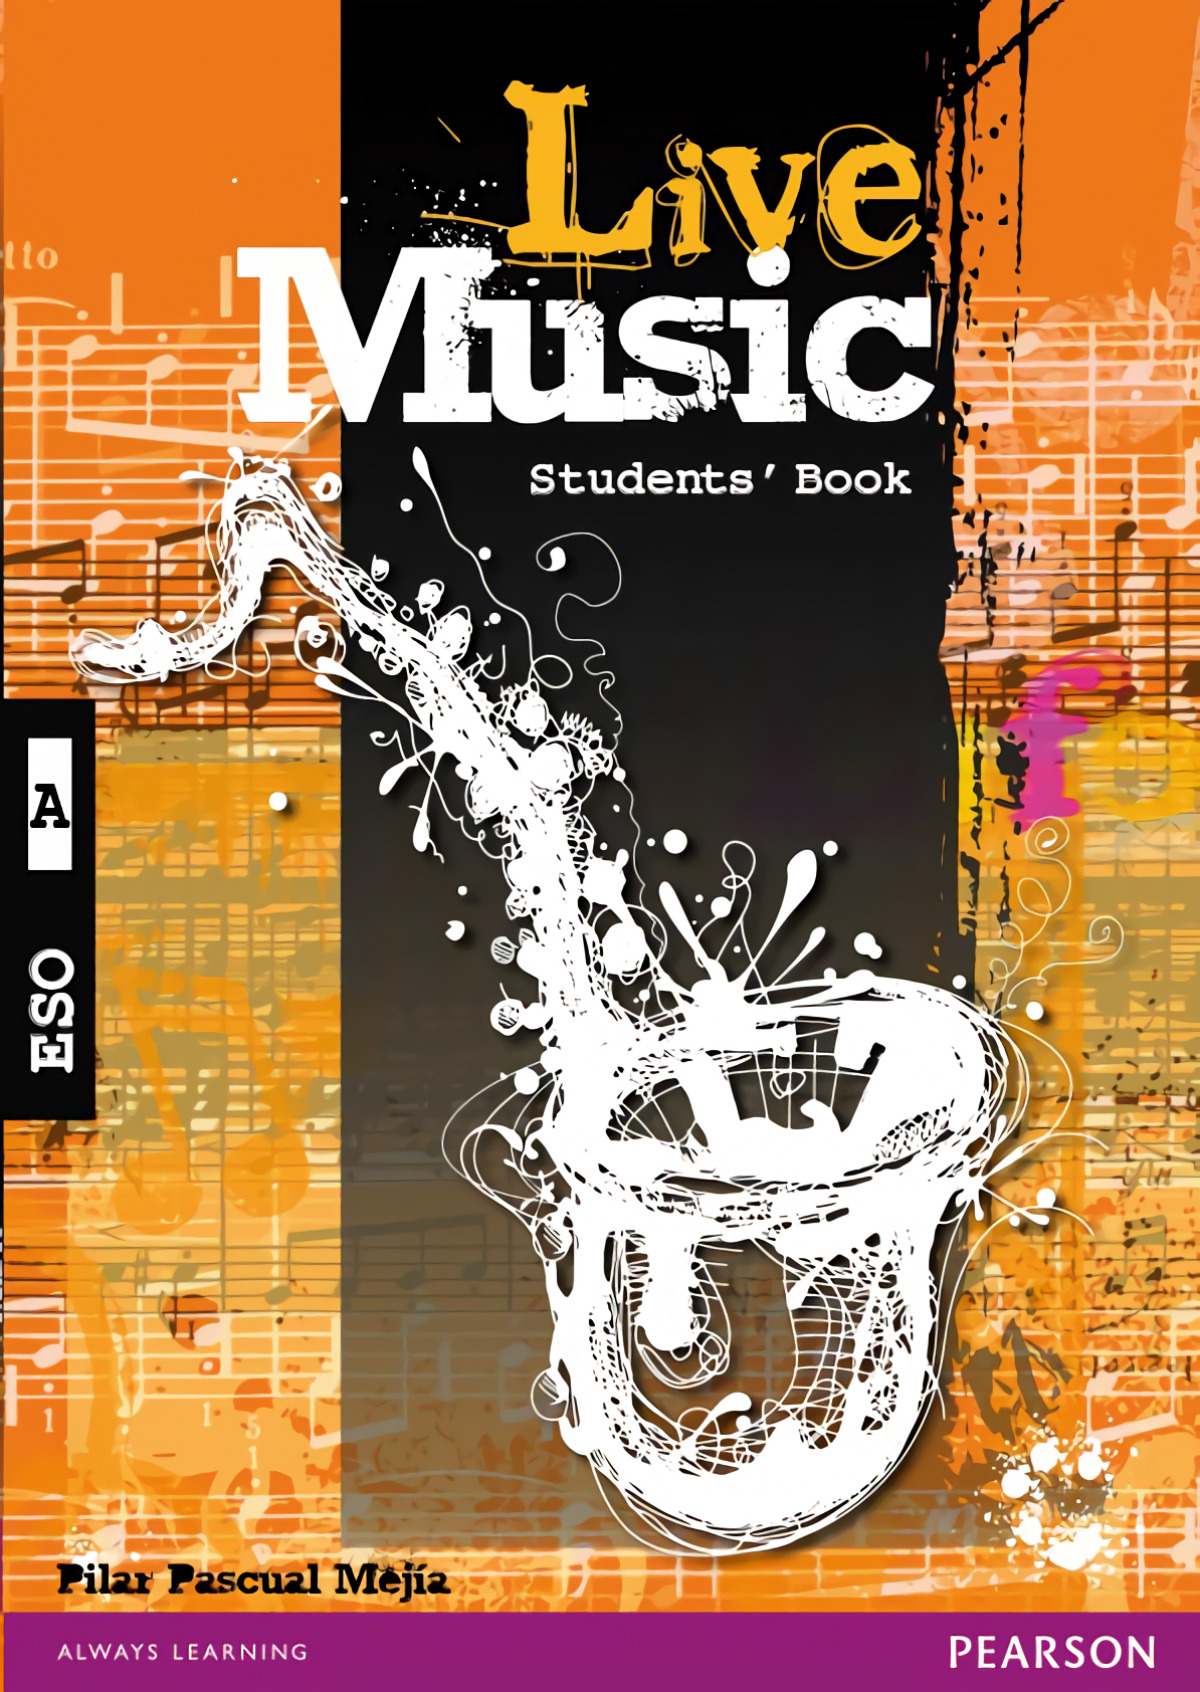 Live music A students' book pack - Pascual Mejia, Pilar